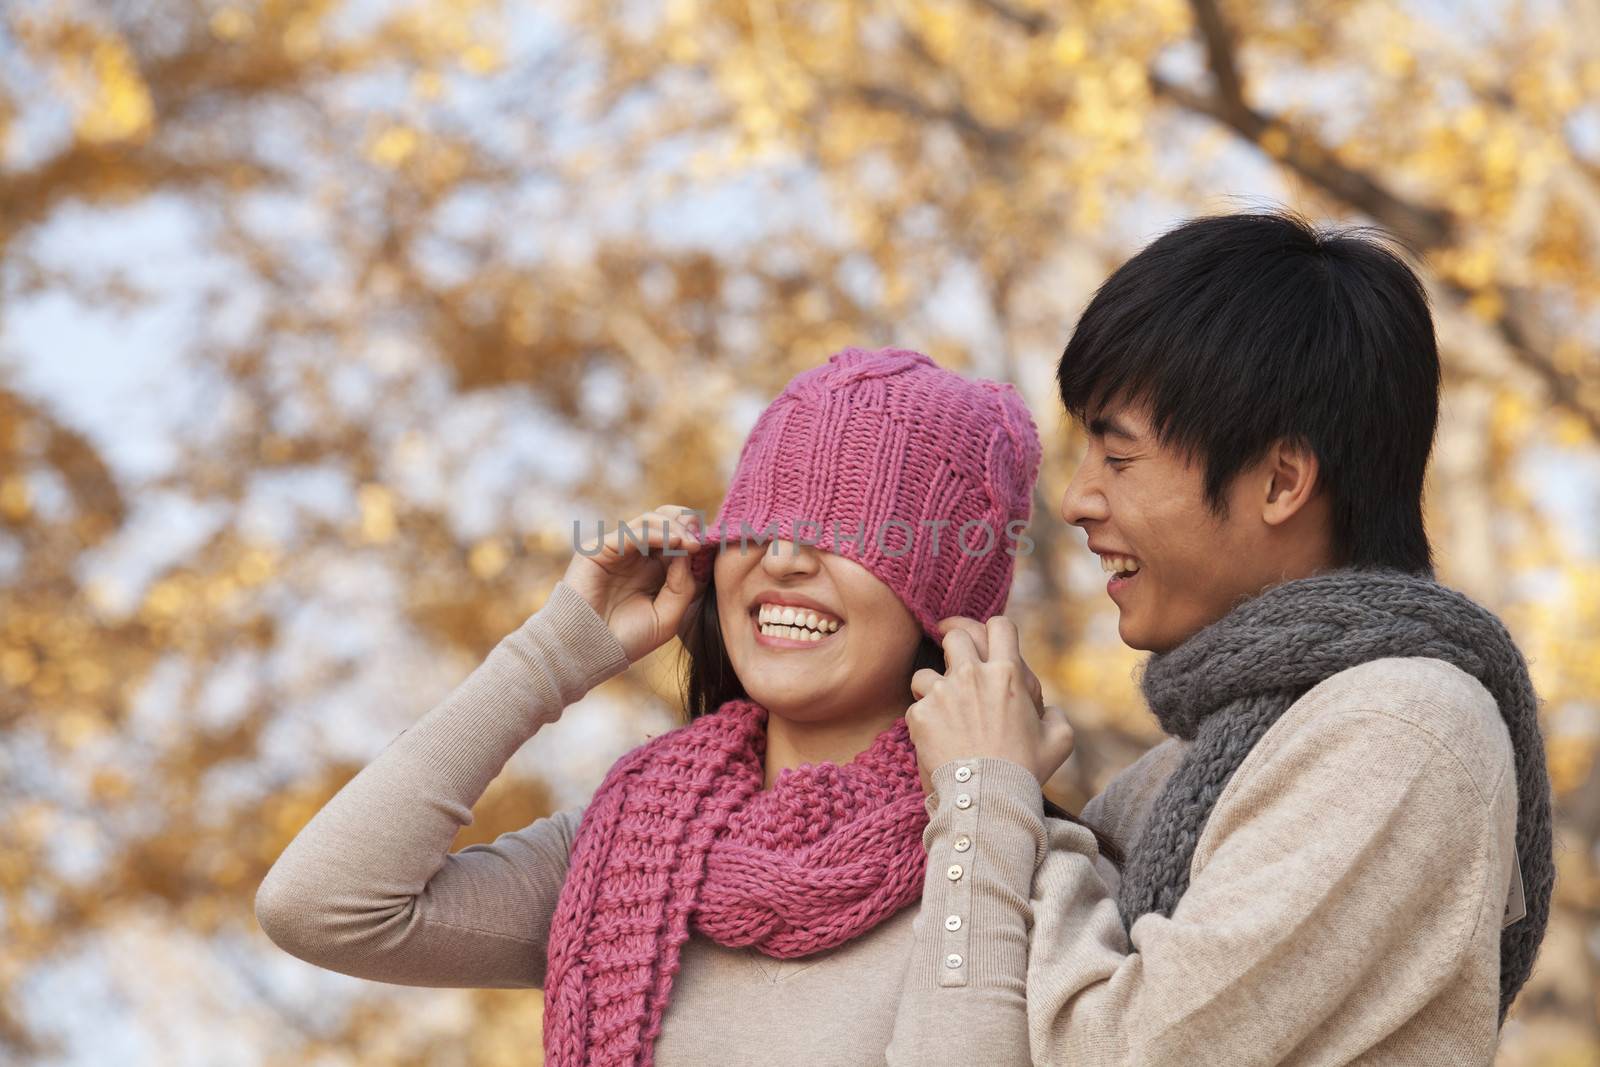 Young Man Covering a Young Woman's Eyes with Hat